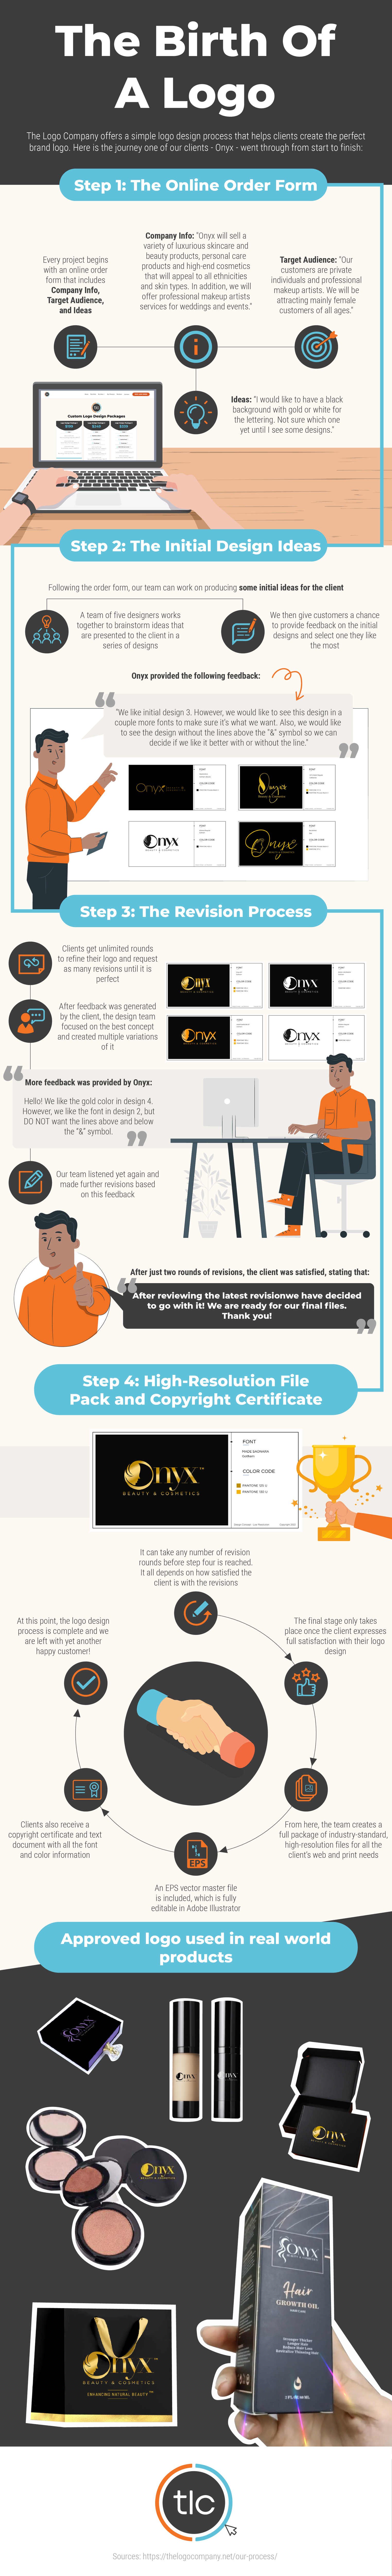 The process of having a logo design made. Infographic of the Birth Of A Logo